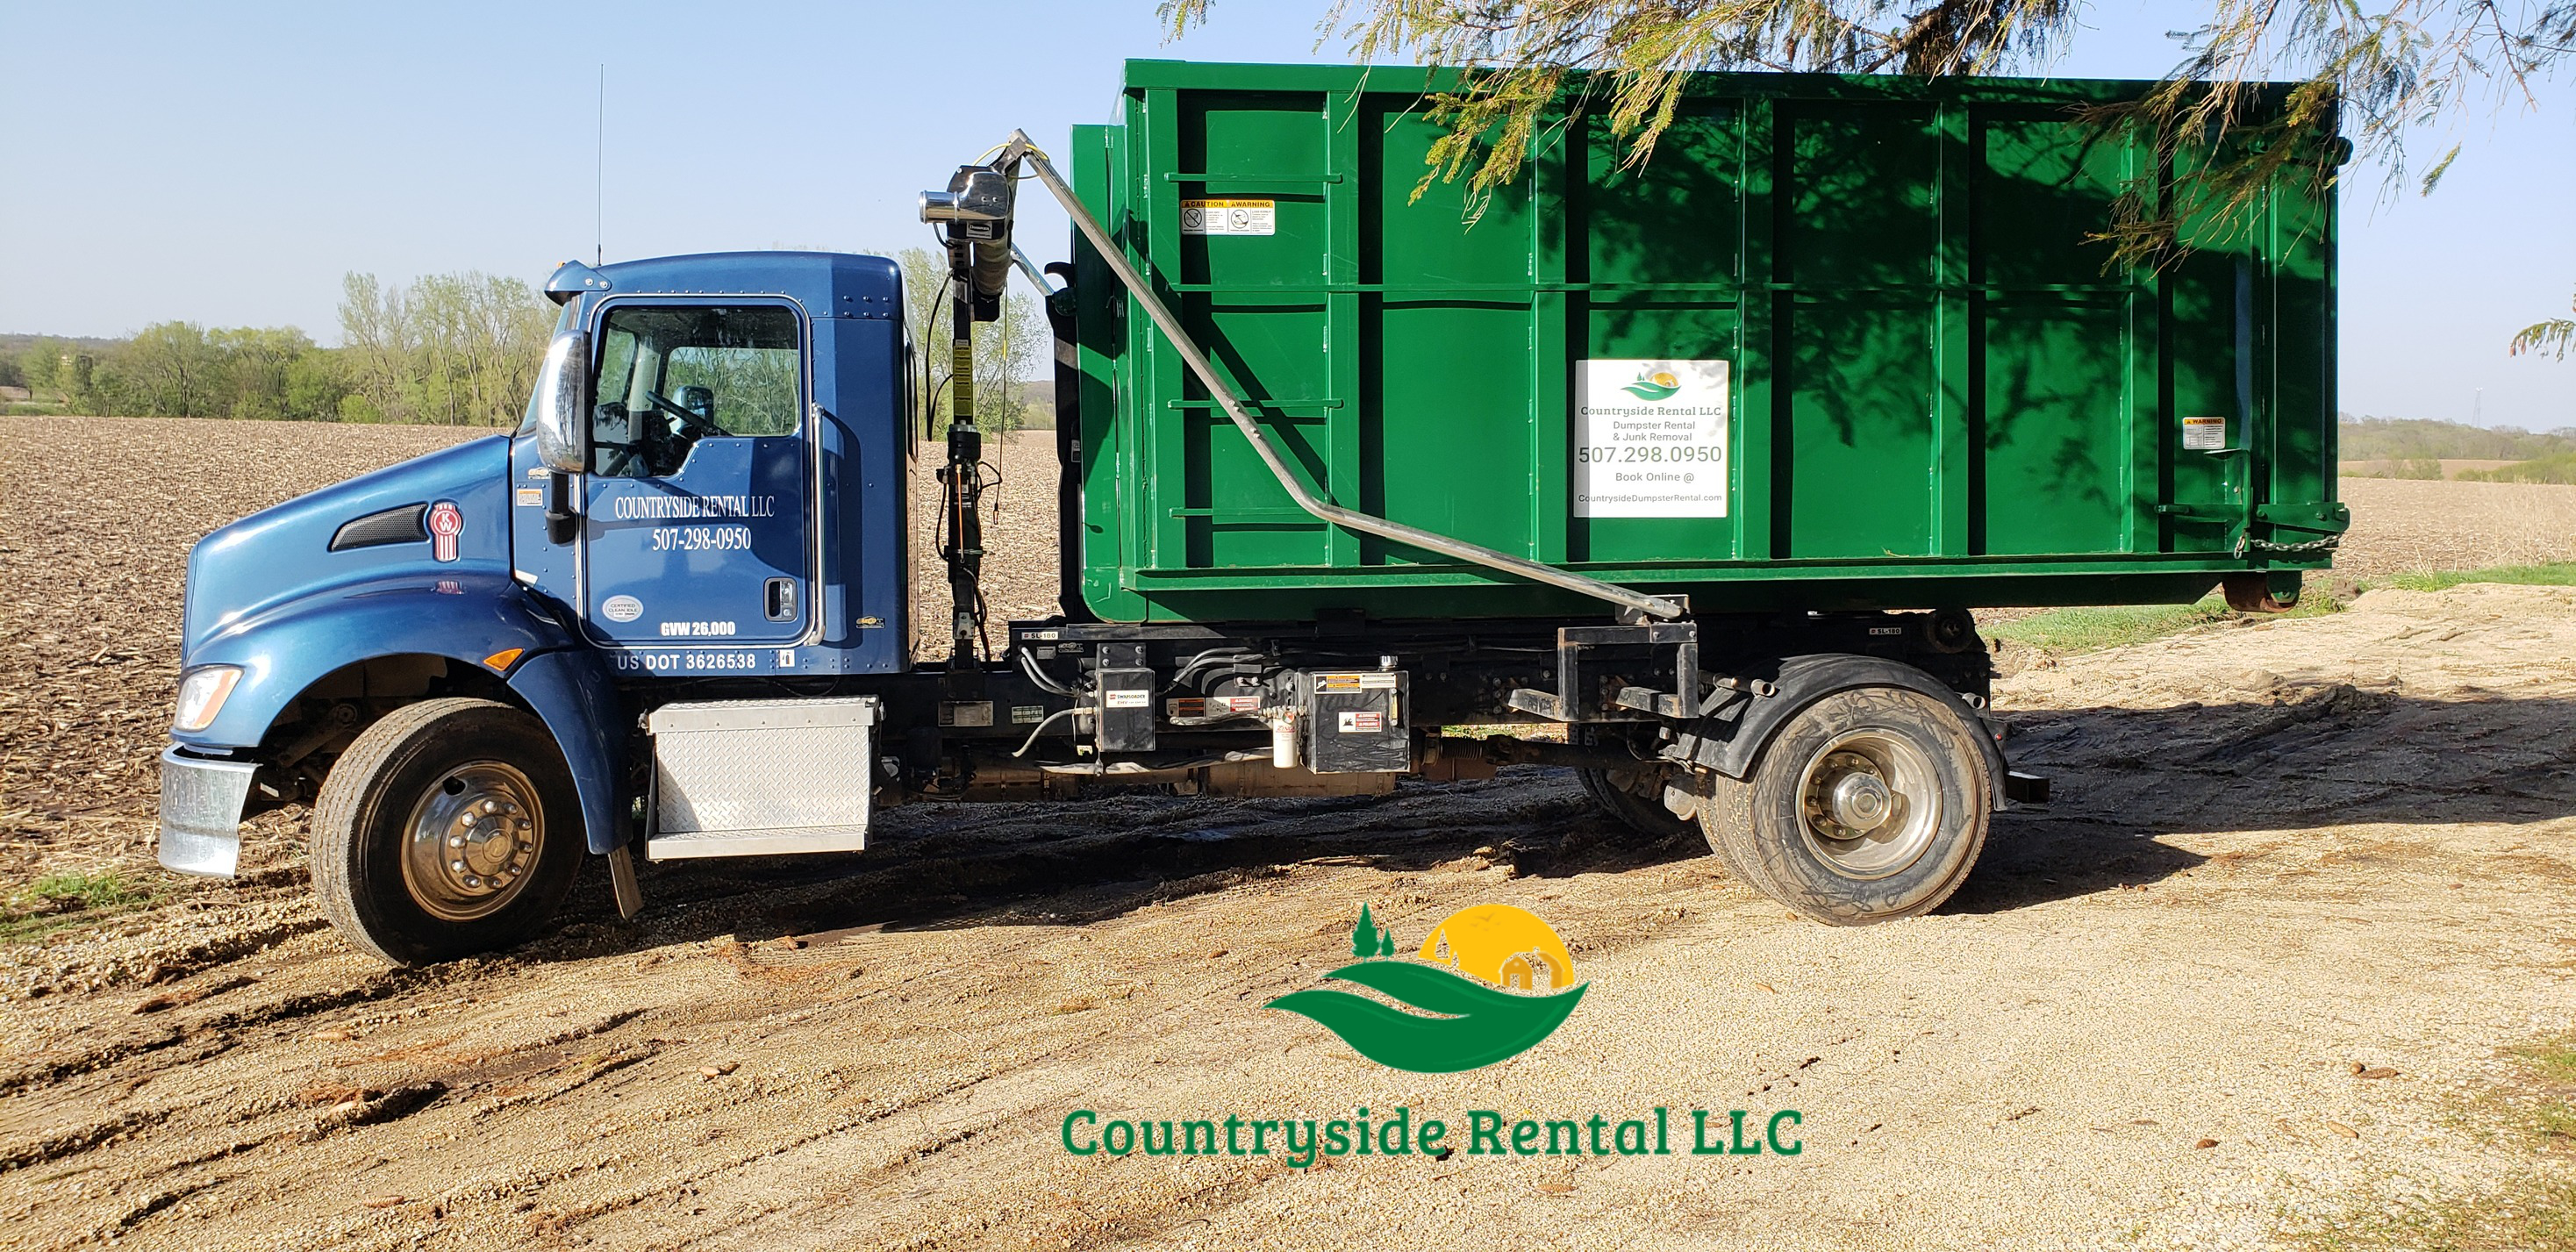 What Are The Best Roll Off Dumpster Rental Prices Companies?